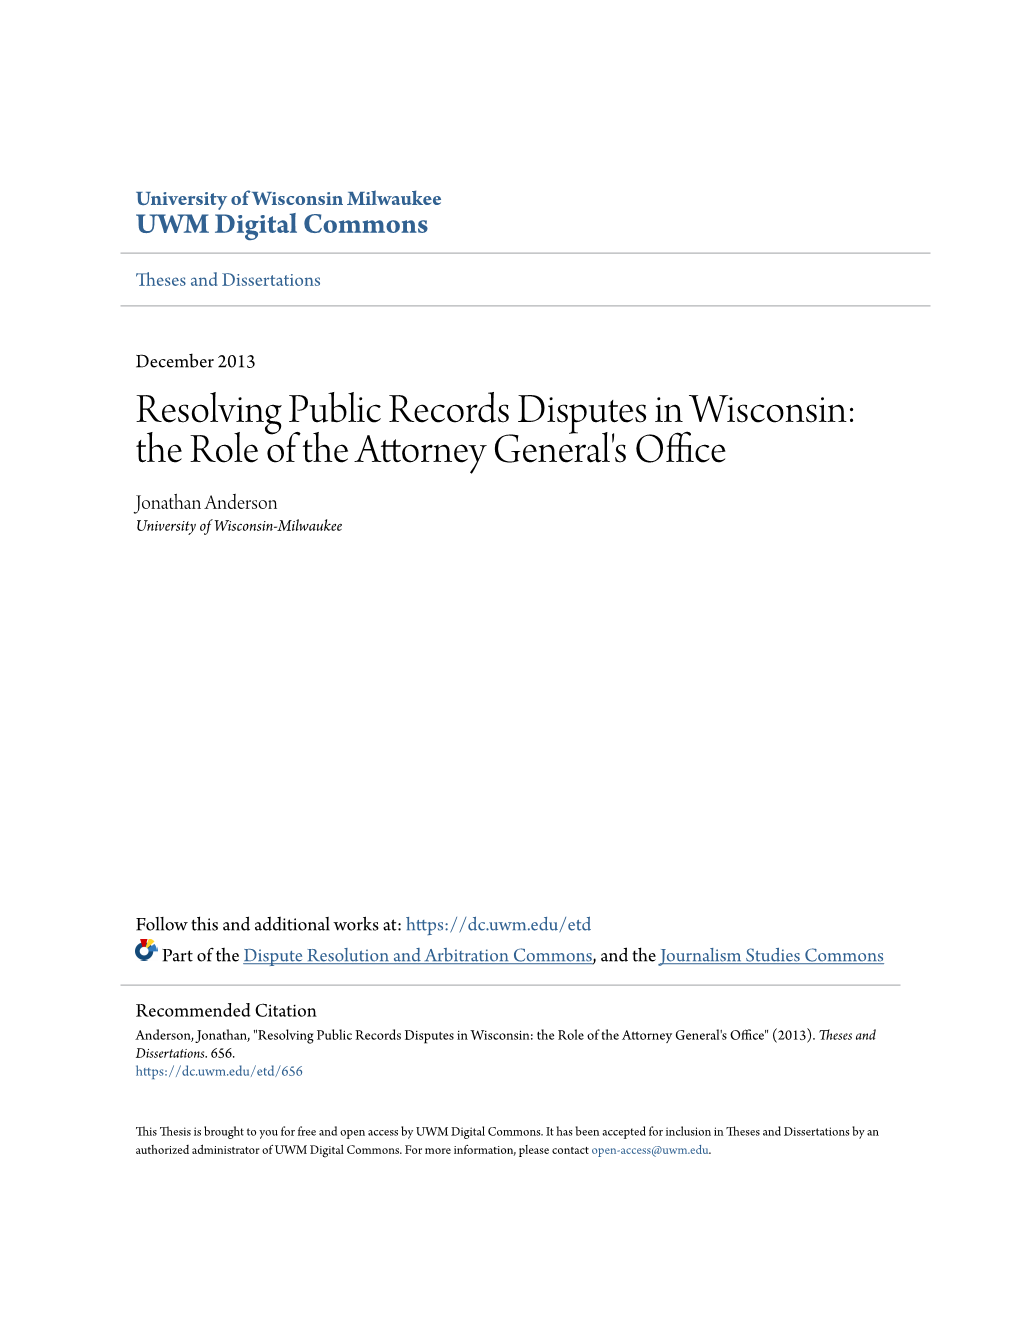 Resolving Public Records Disputes in Wisconsin: the Role of the Attorney General's Office Jonathan Anderson University of Wisconsin-Milwaukee